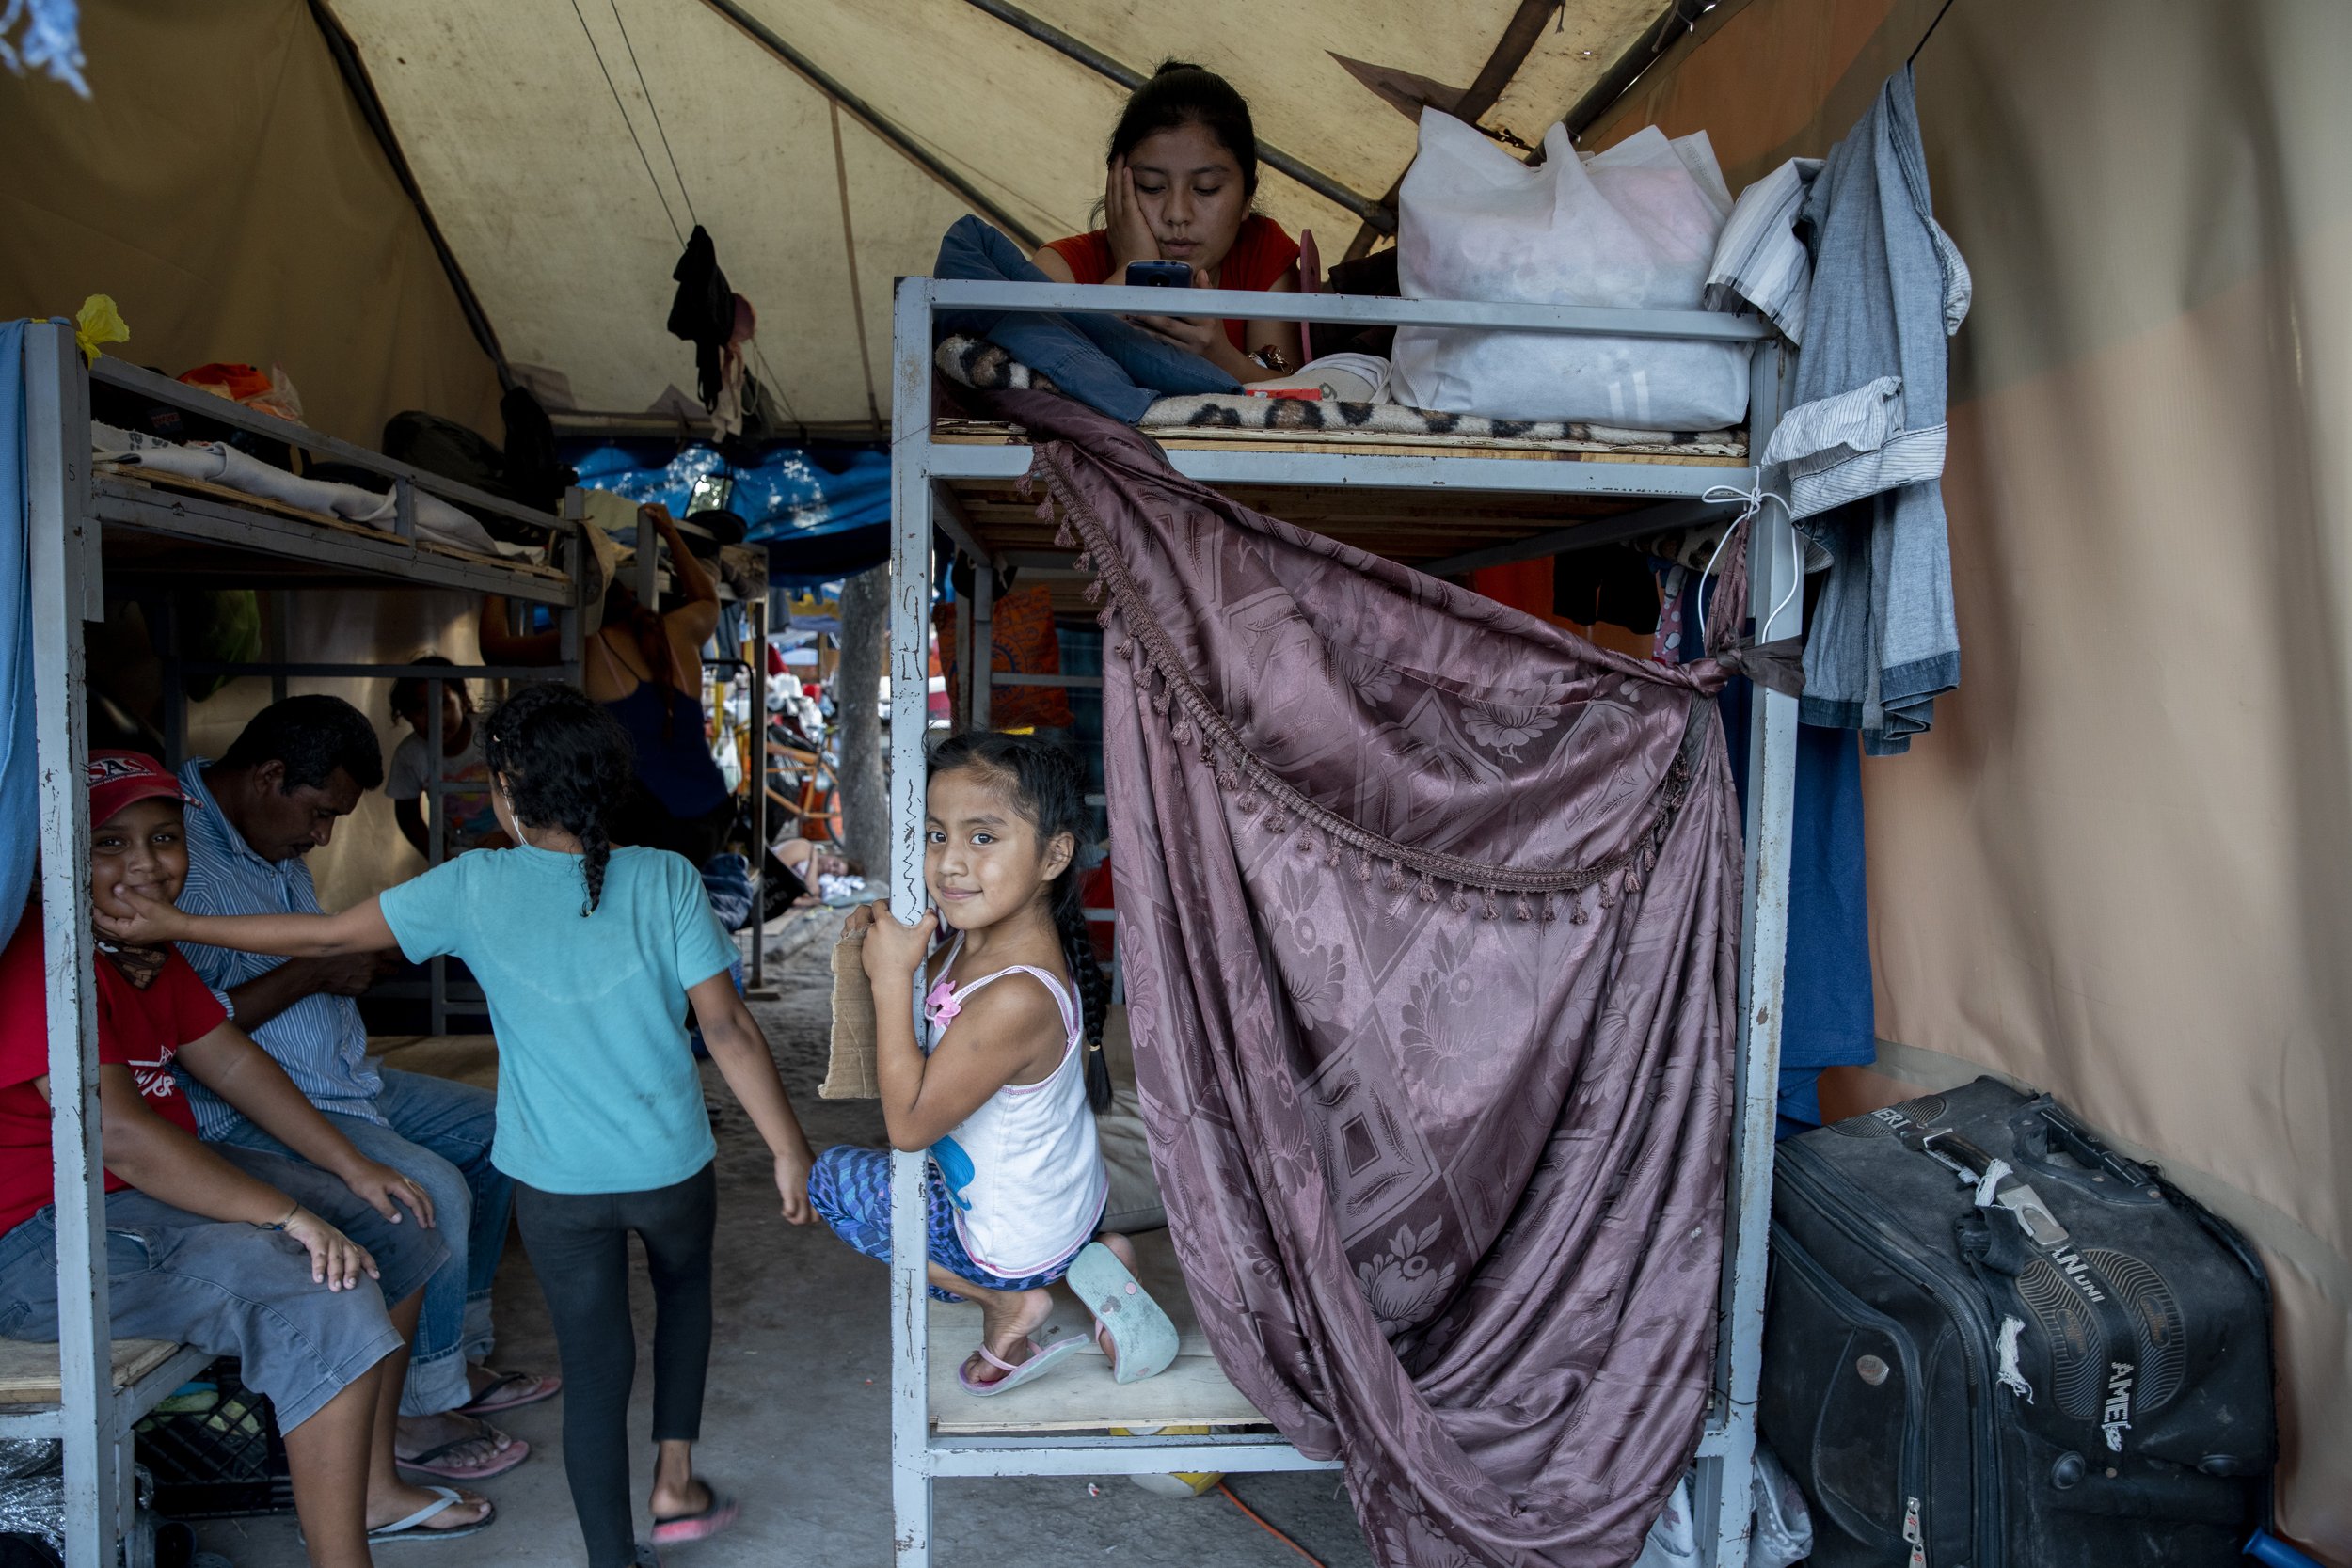  Reynosa, Mexico migrant camp. August 2021. 